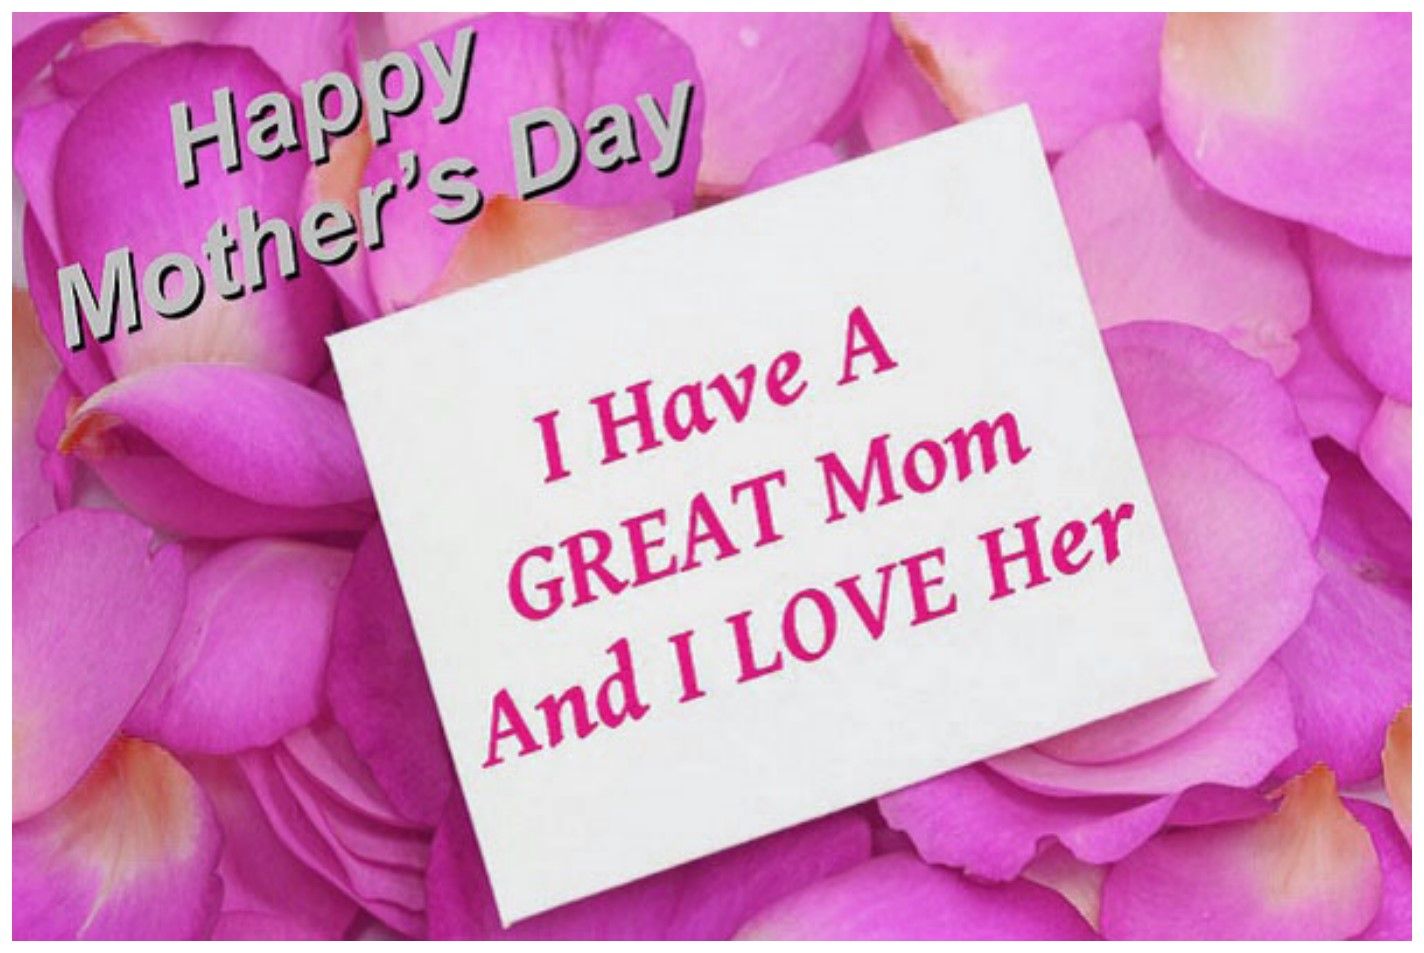 Mother's Day 2020 HD Wallpapers - Wallpaper Cave